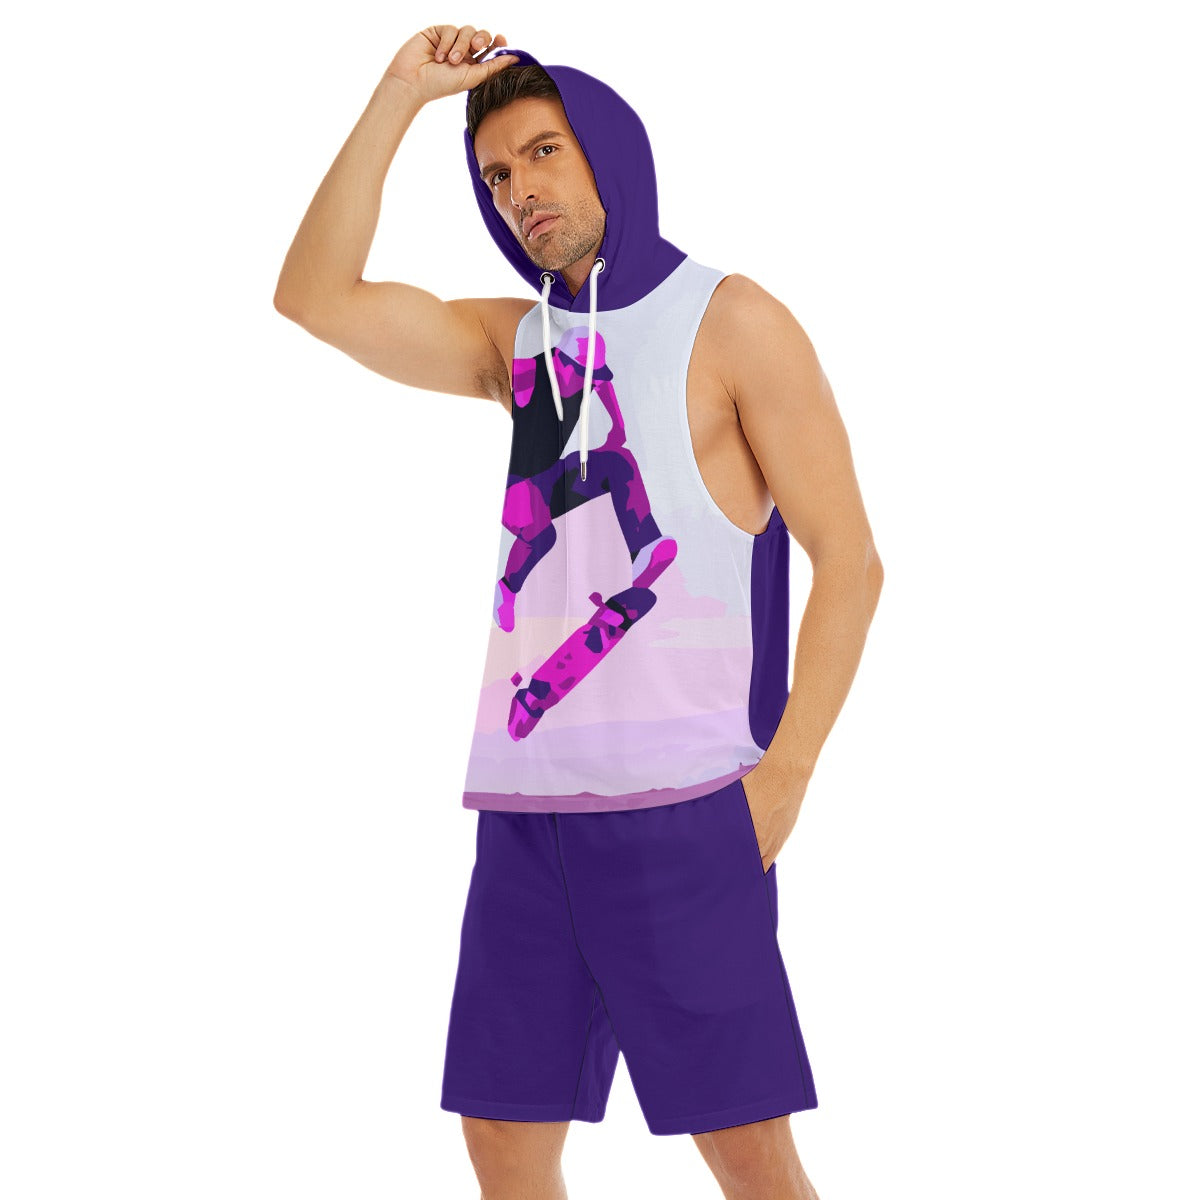 Staying until Sunset Sleeveless Semi Stringer Hooded Tank And Shorts Sets